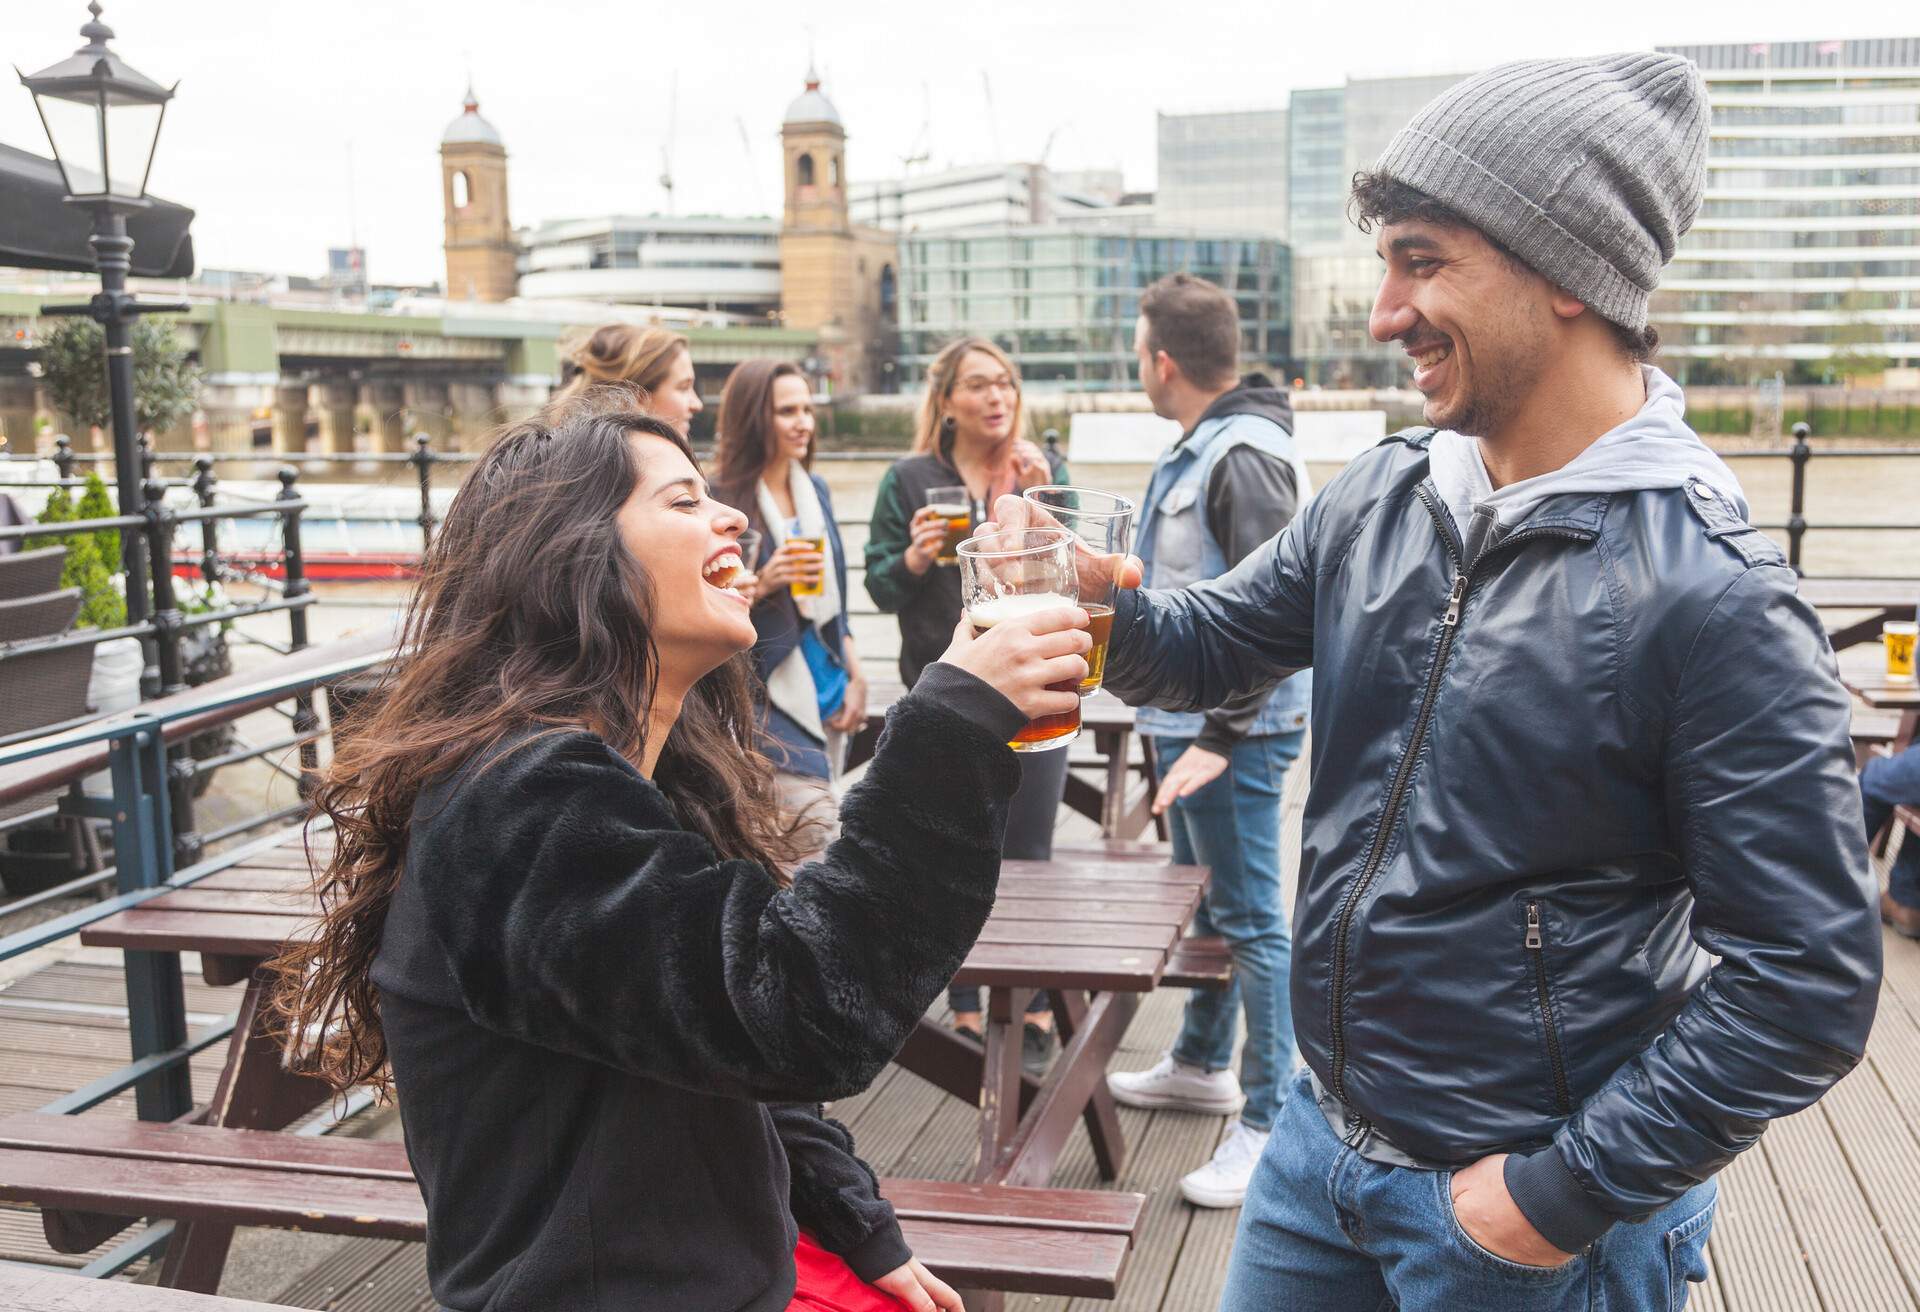 Young couple enjoying a beer at pub in London with more people on background. Outdoor scene, winter season, love and friendship concepts.; Shutterstock ID 282996266; Purpose: Content; Brand (KAYAK, Momondo, Any): Any